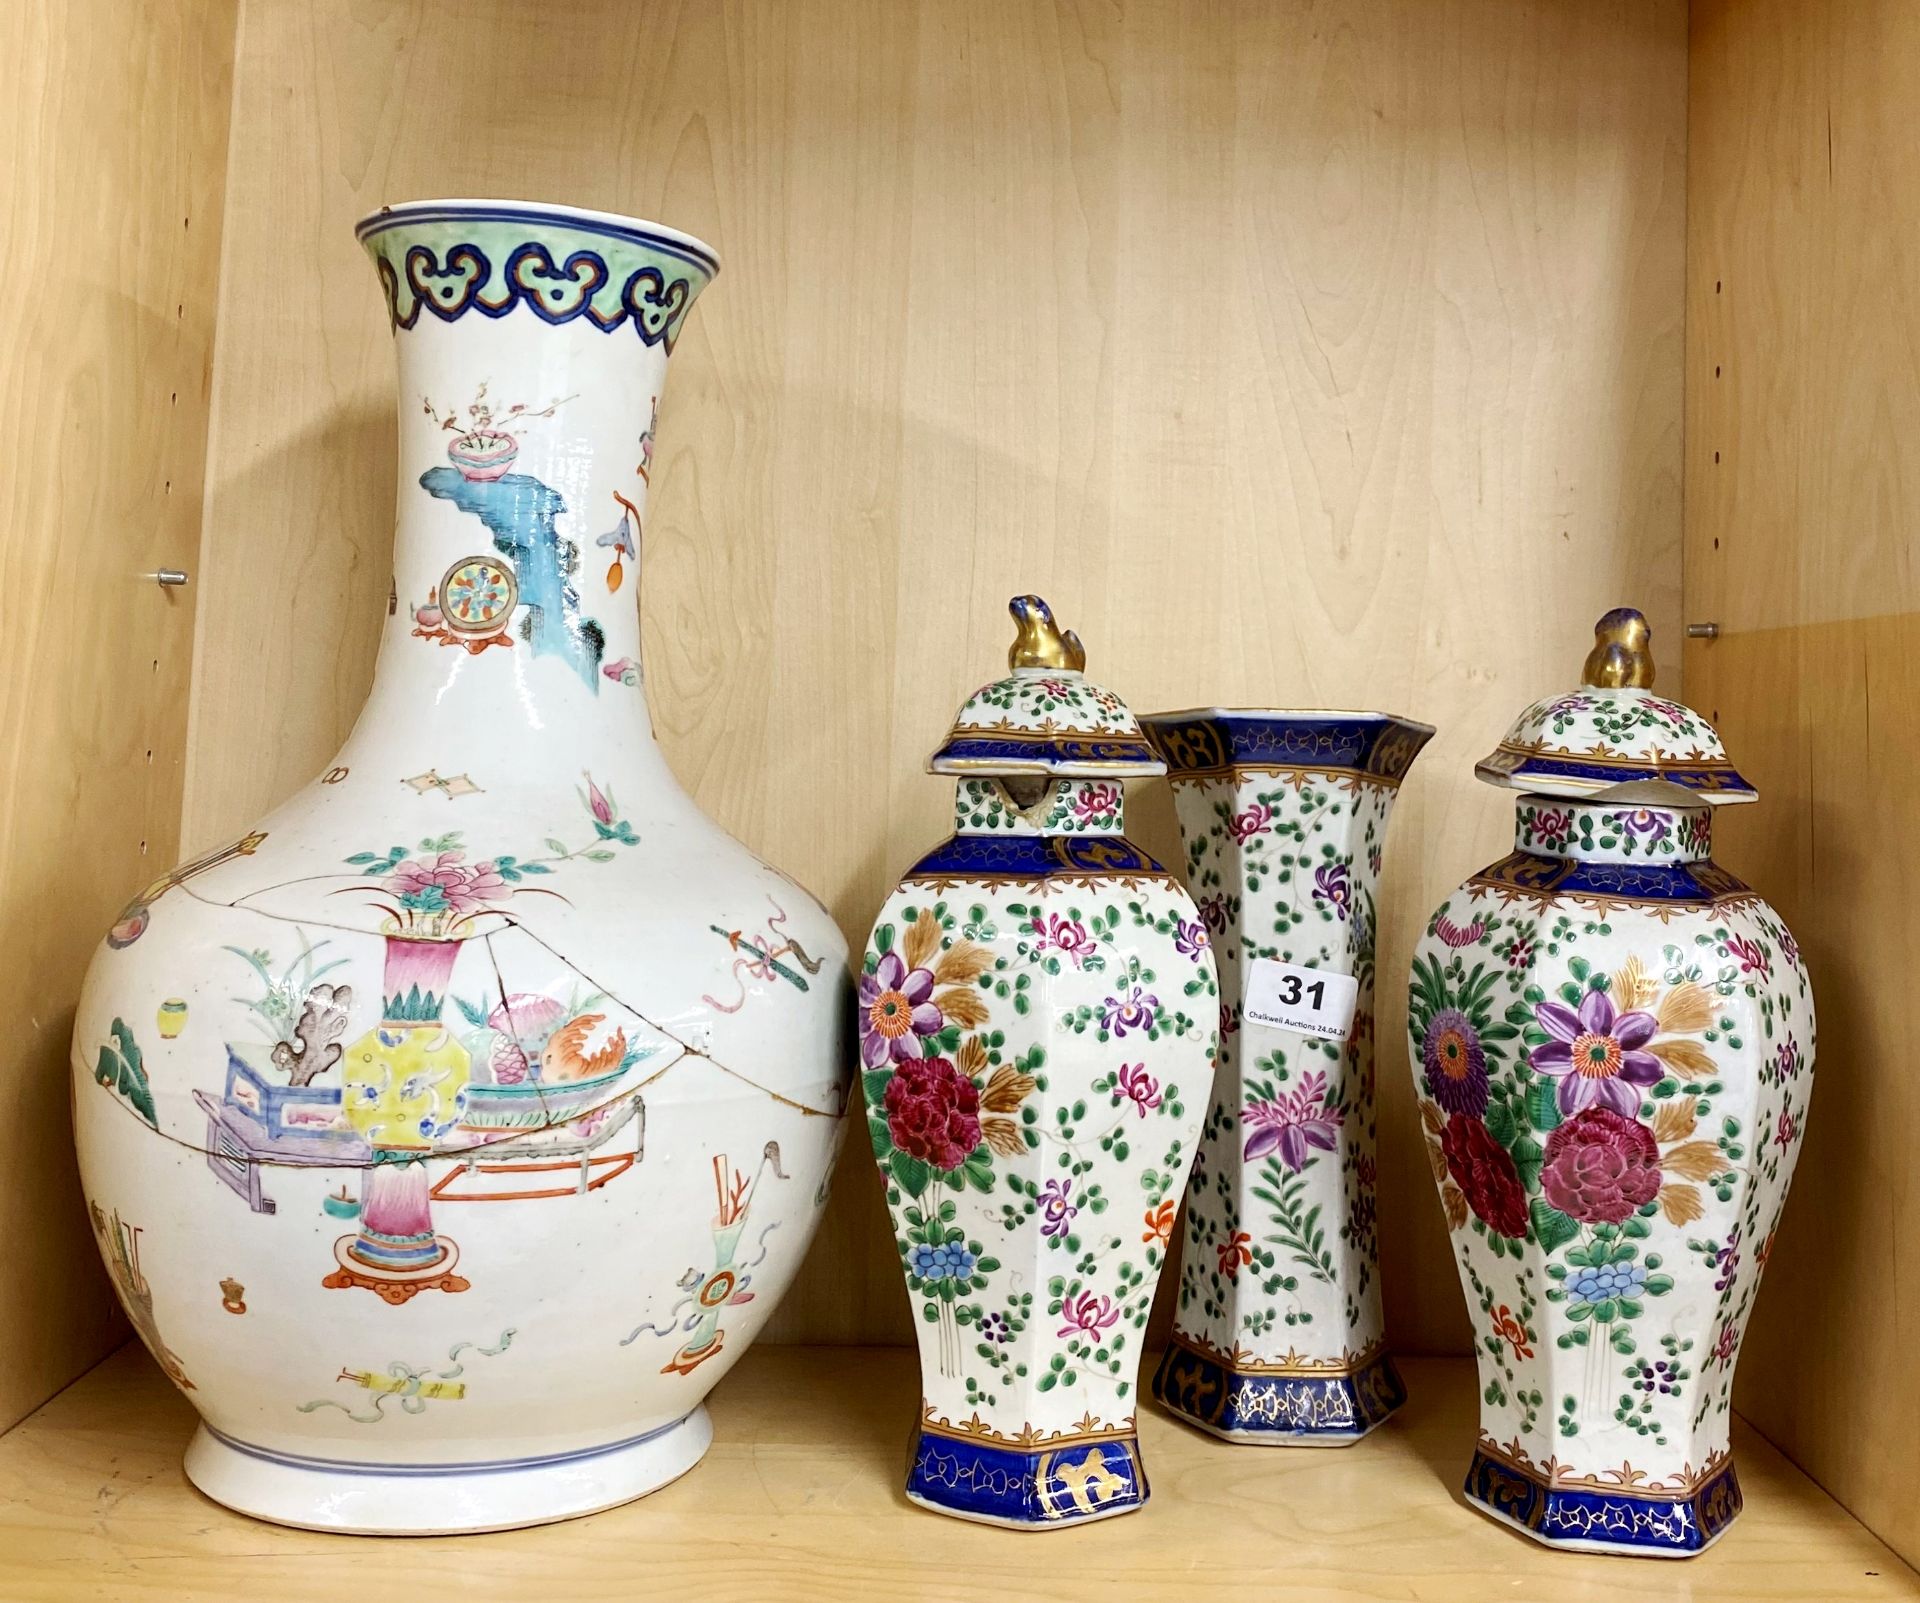 A 19thC Chinese porcelain garniture together with a large 19thC Chinese porcelain vase (exstensively